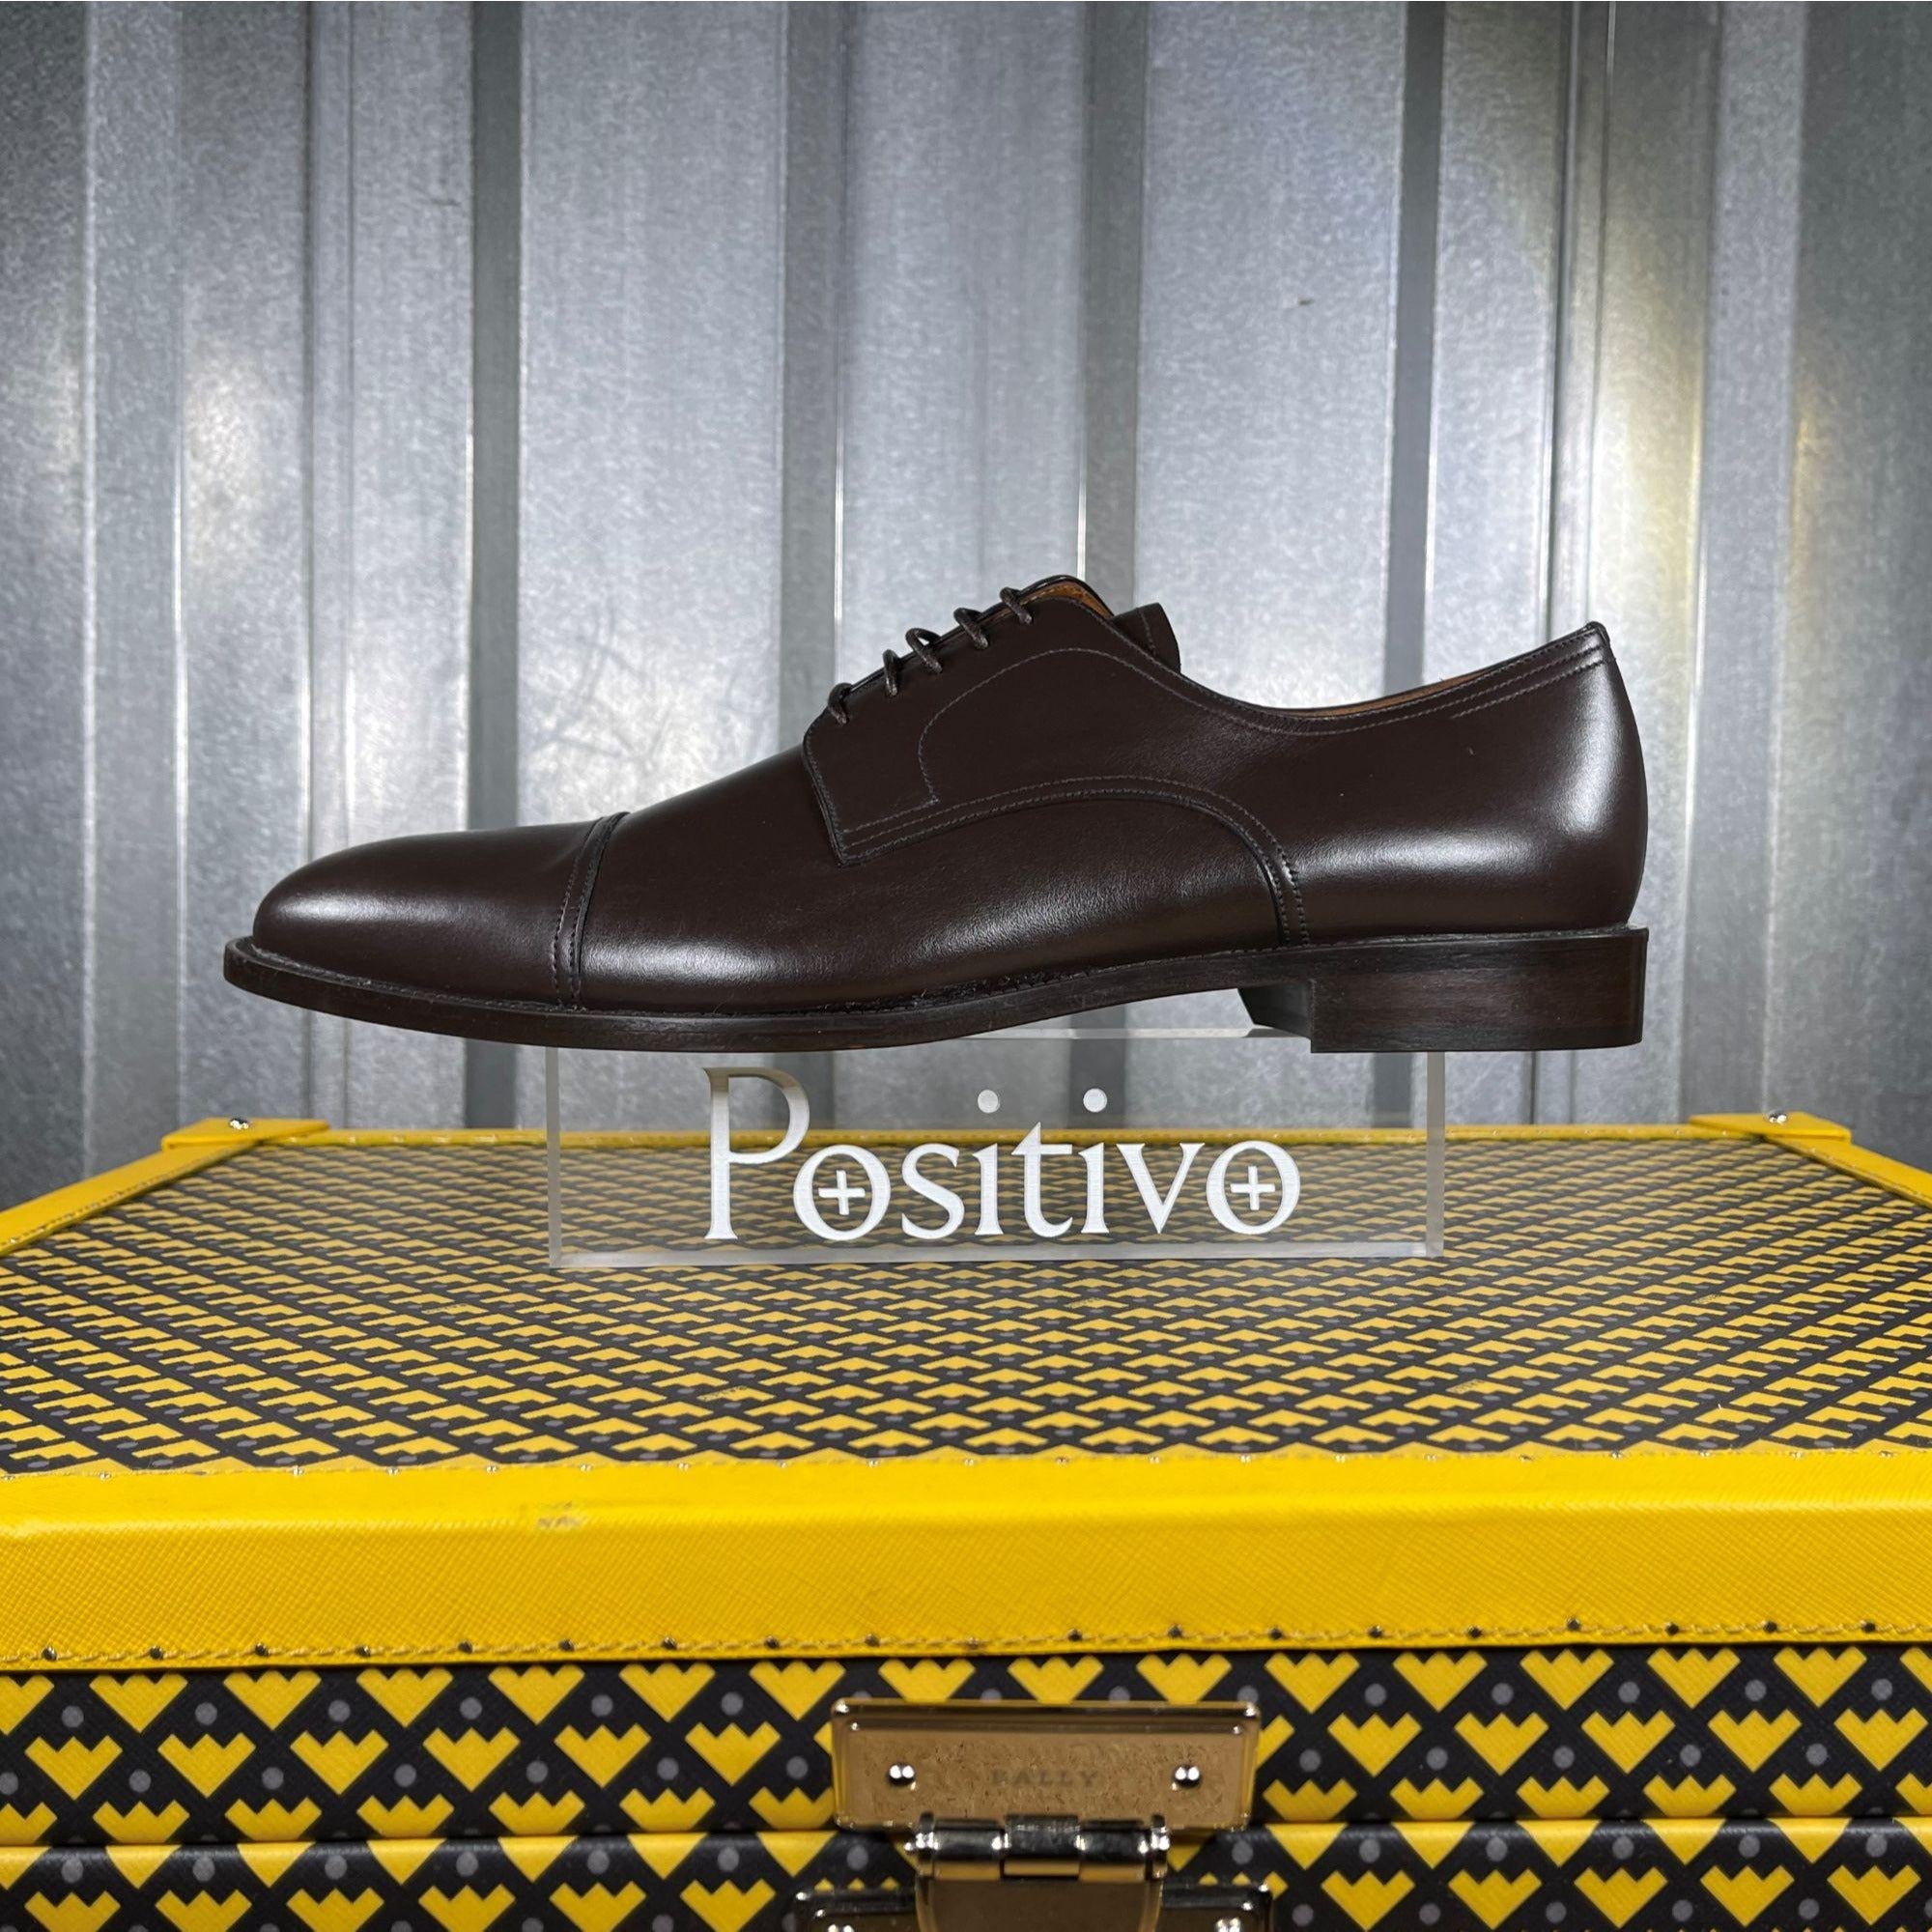 Bally Salfor Chocolate Leather Derby Shoes - Positivo Clothing